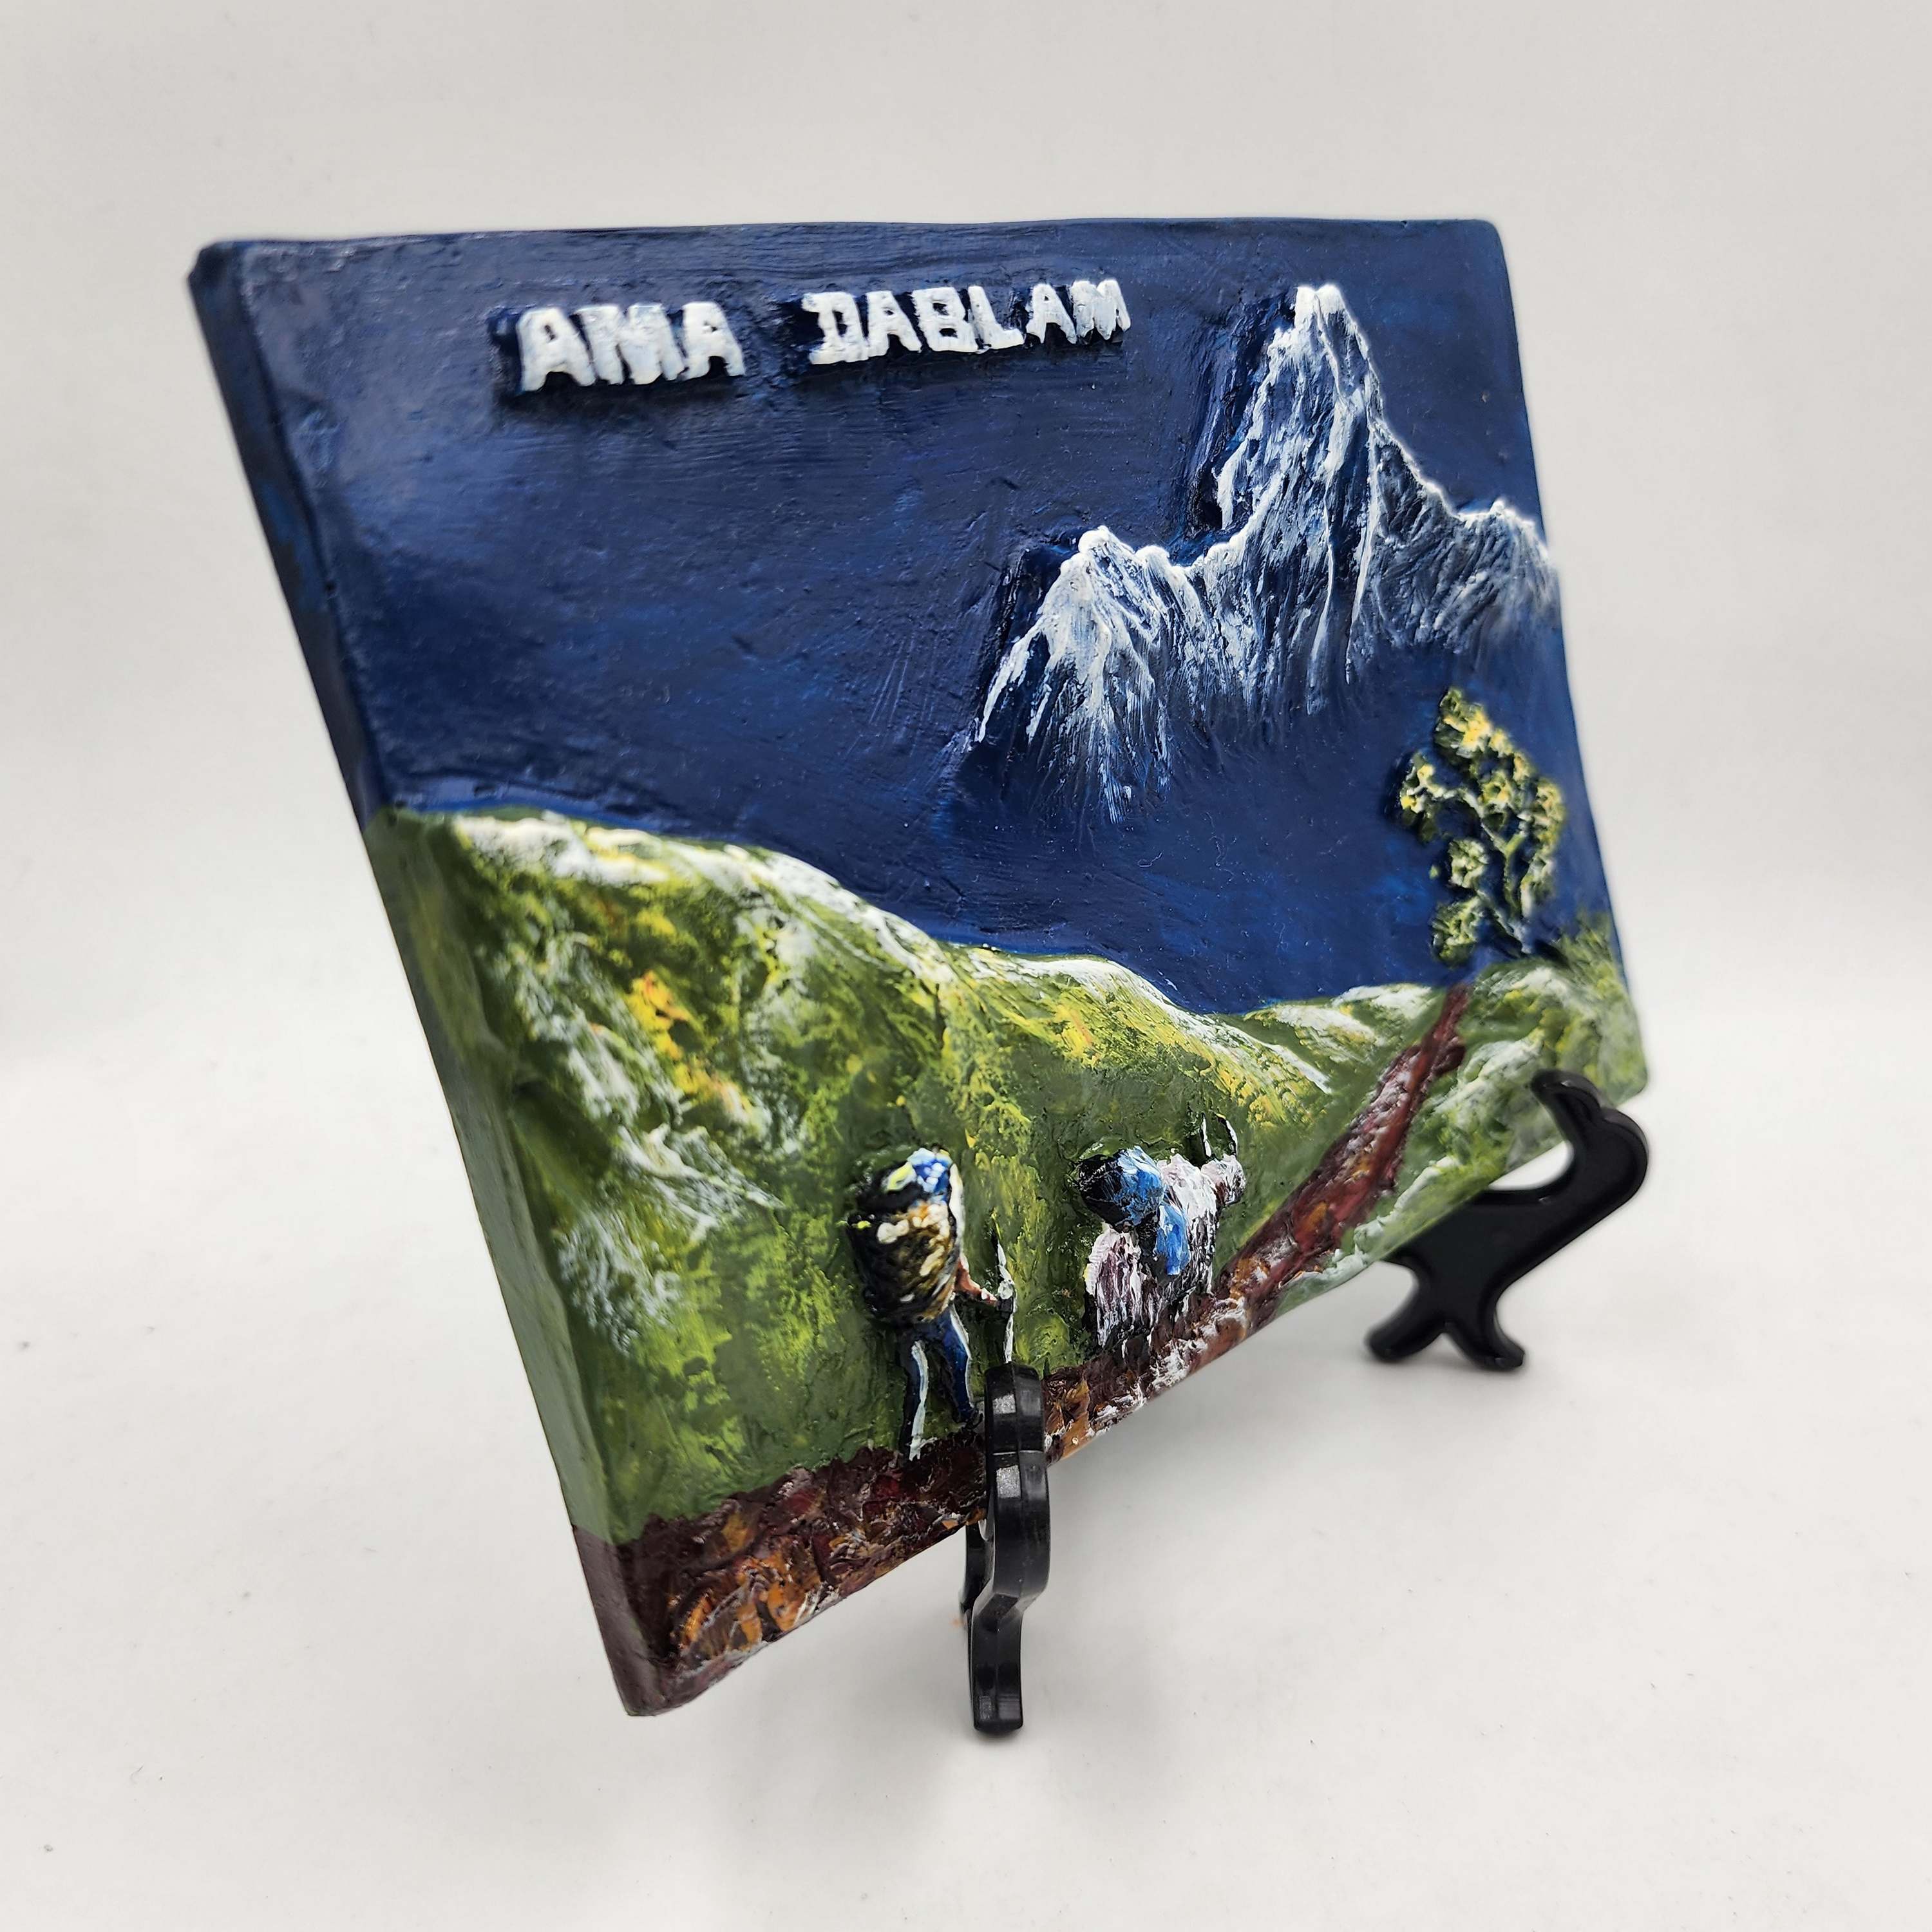 3d Fiber Art Of Mt. Ama Dablam Of Nepal With Stand And Wall Hanger